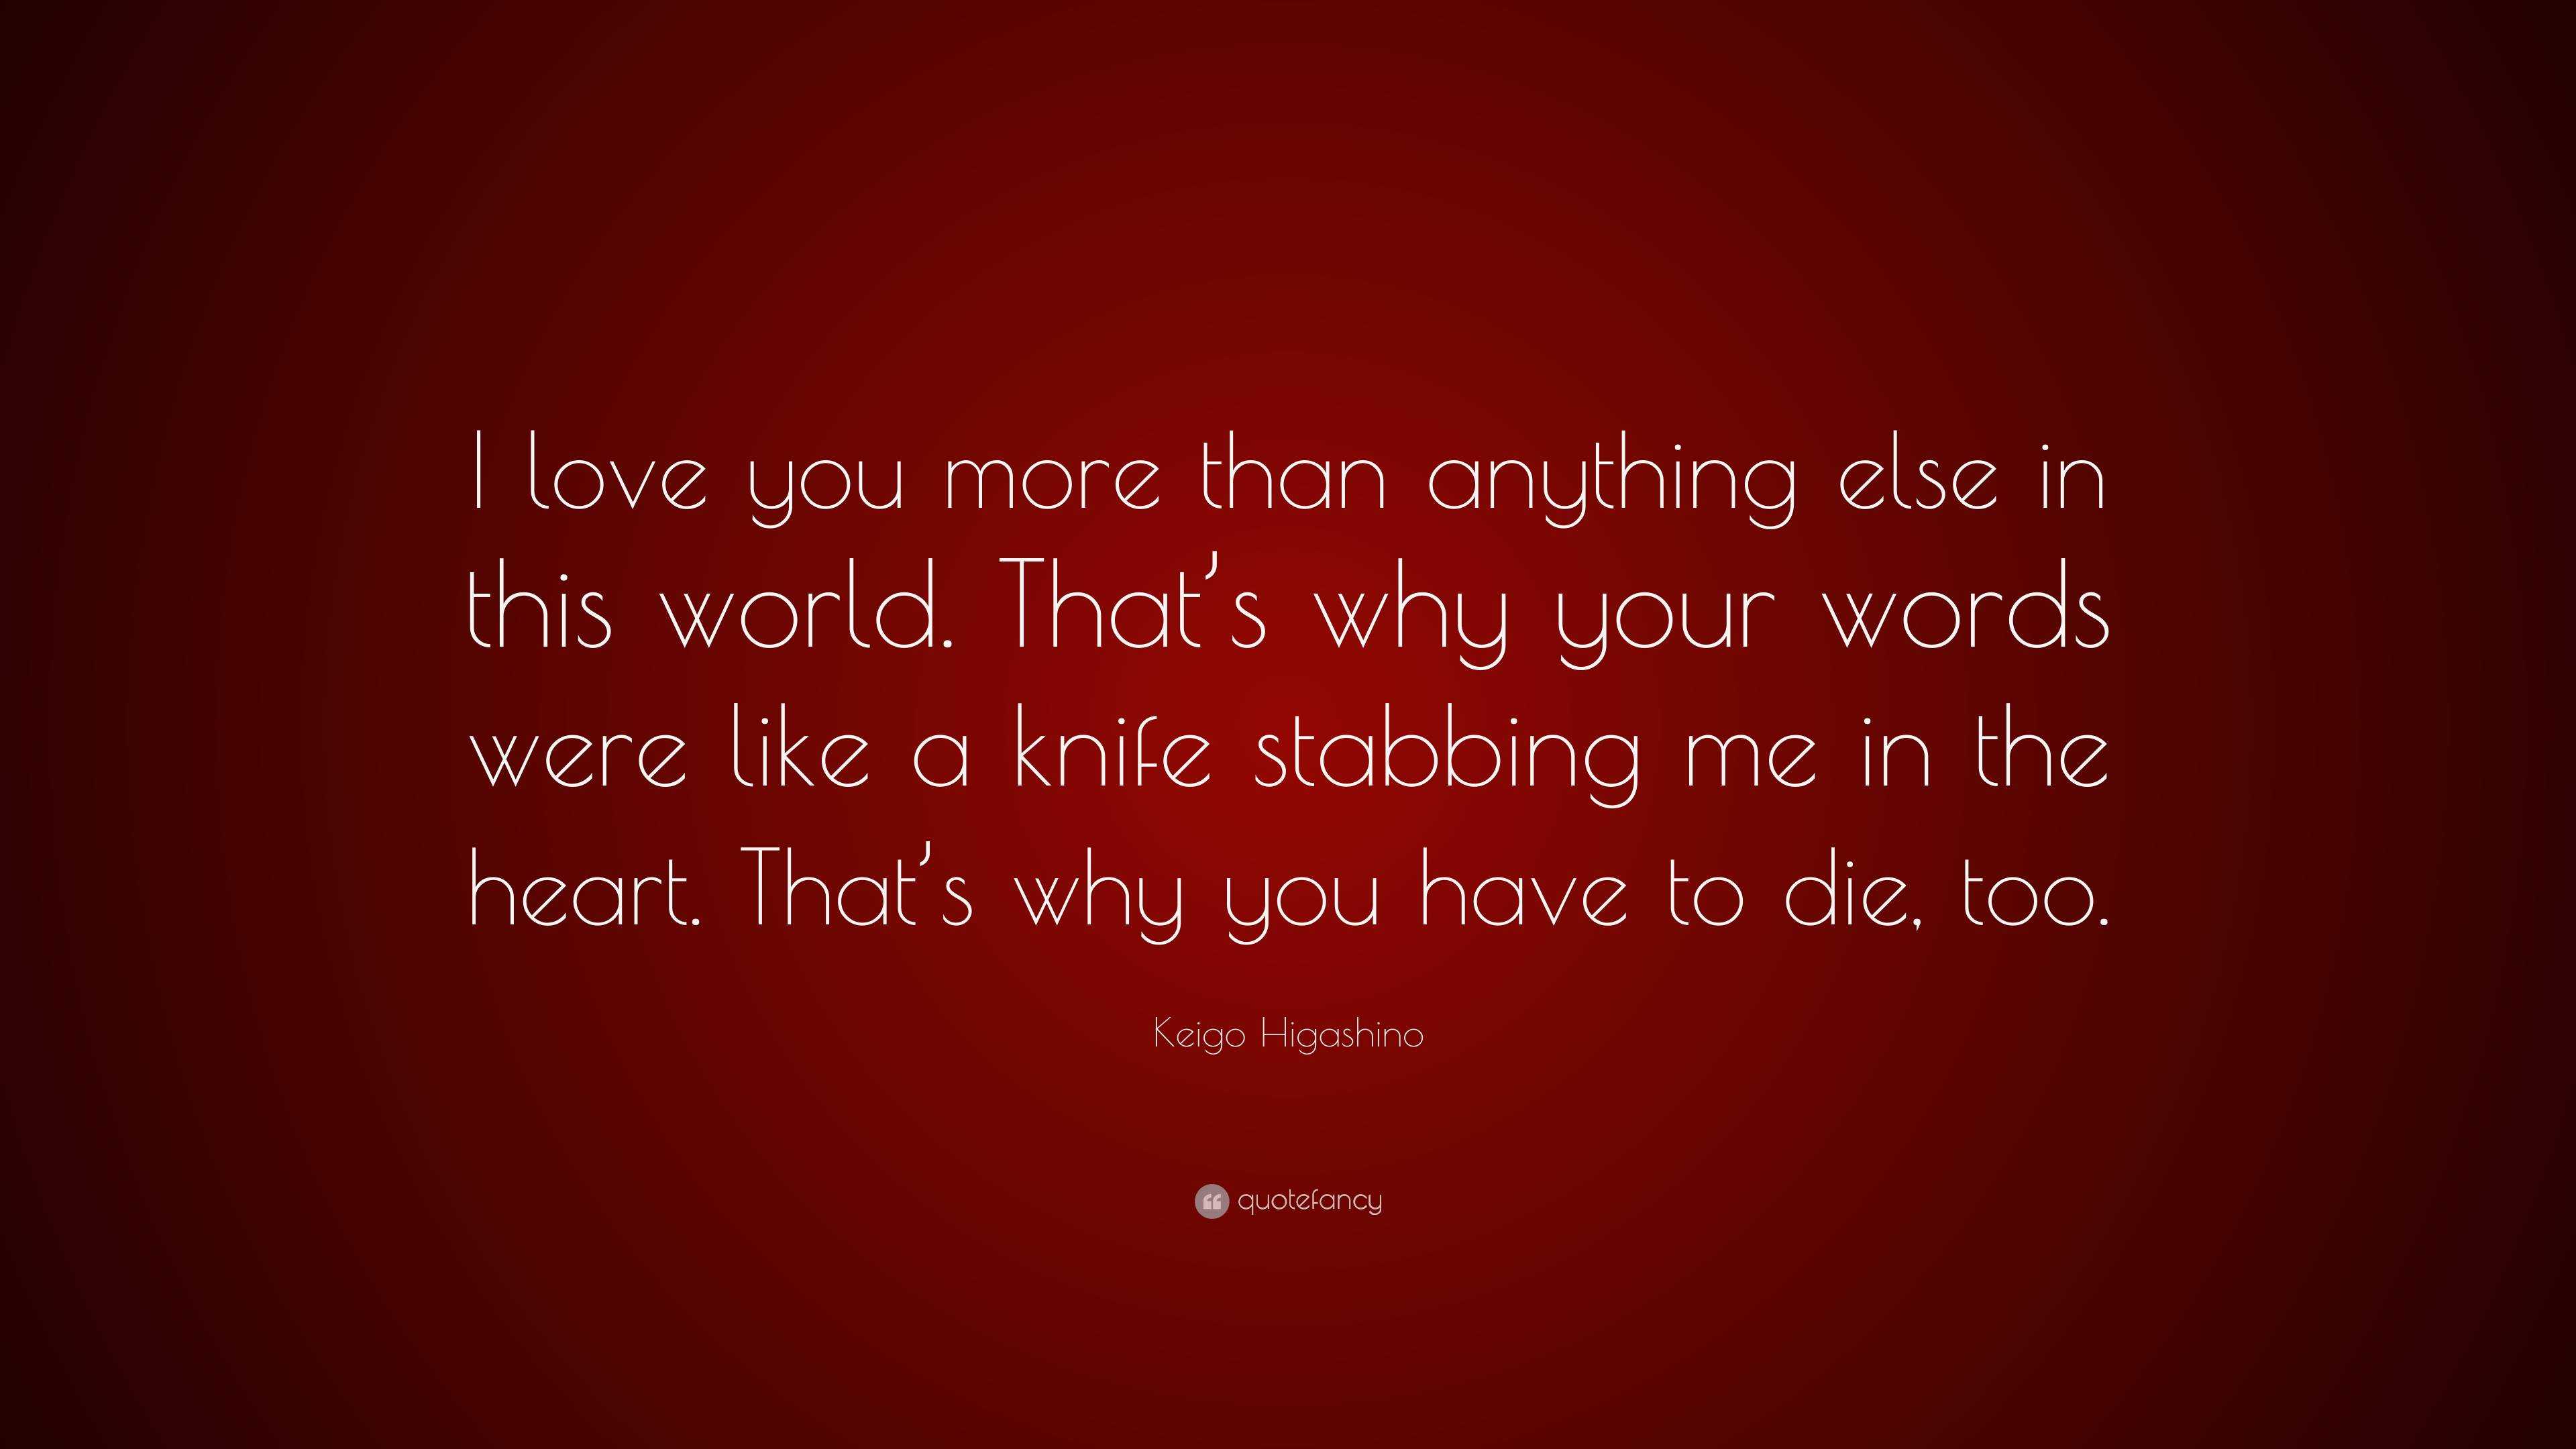 Keigo Higashino Quote I Love You More Than Anything Else In This World That S Why Your Words Were Like A Knife Stabbing Me In The Heart That